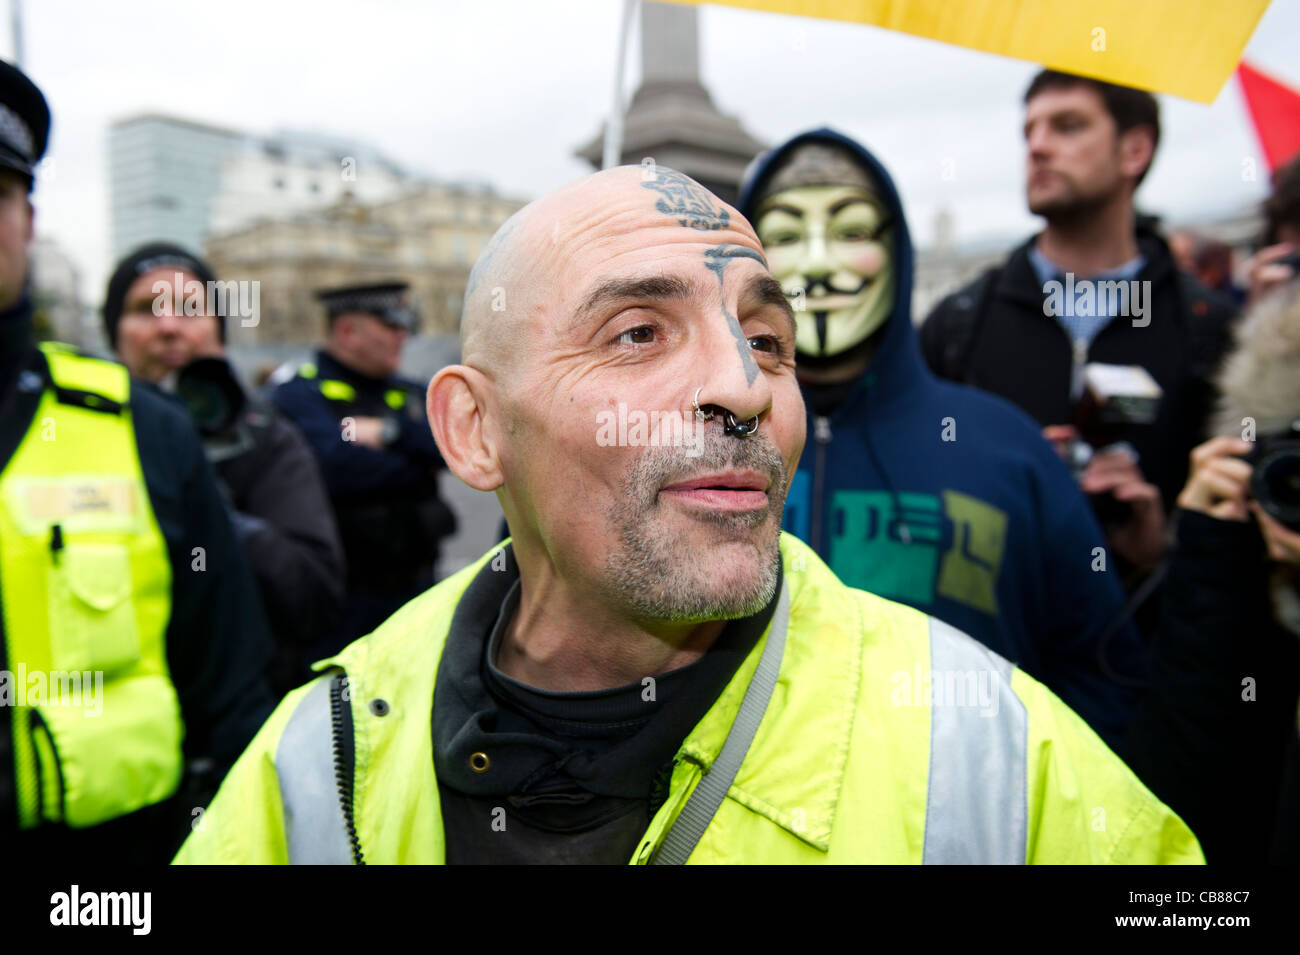 Bald headed tattooed man with piercings wearing reflective jacket having fun at public sector march in London. Stock Photo